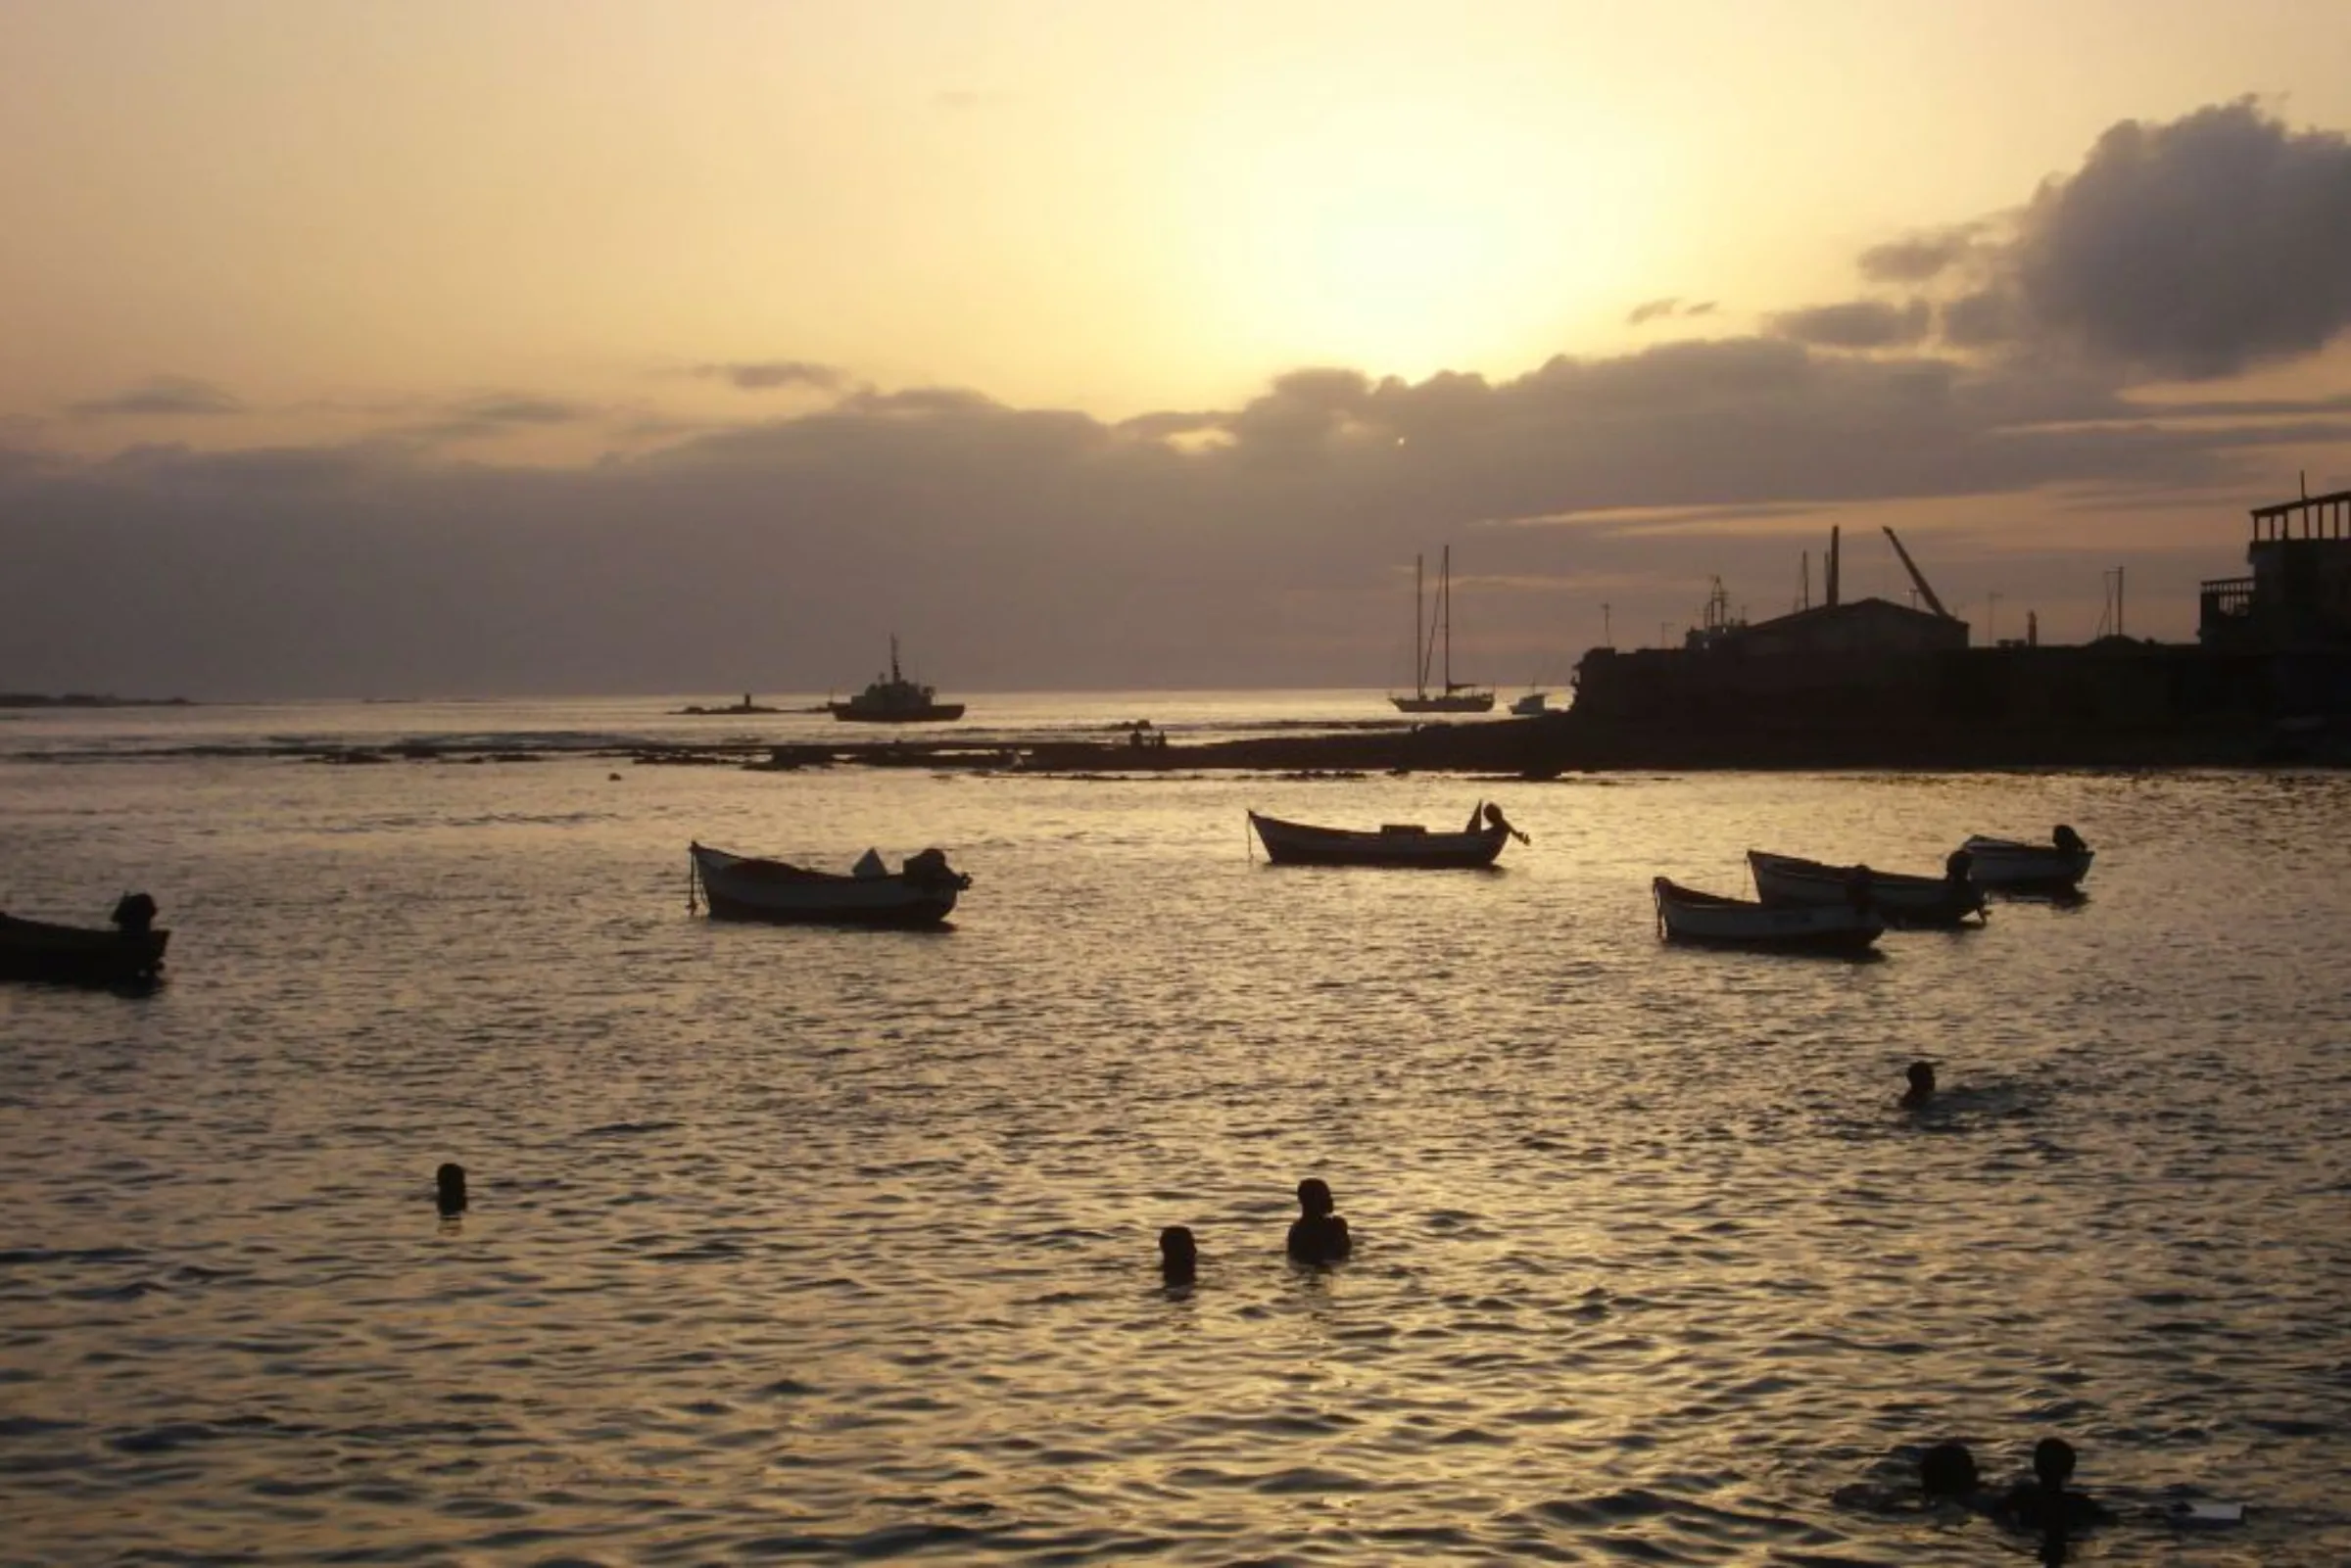 Children play in the water at sunset in the port of Sal Rei, the main town of Cape Verde's Boa Vista island, July 15, 2010